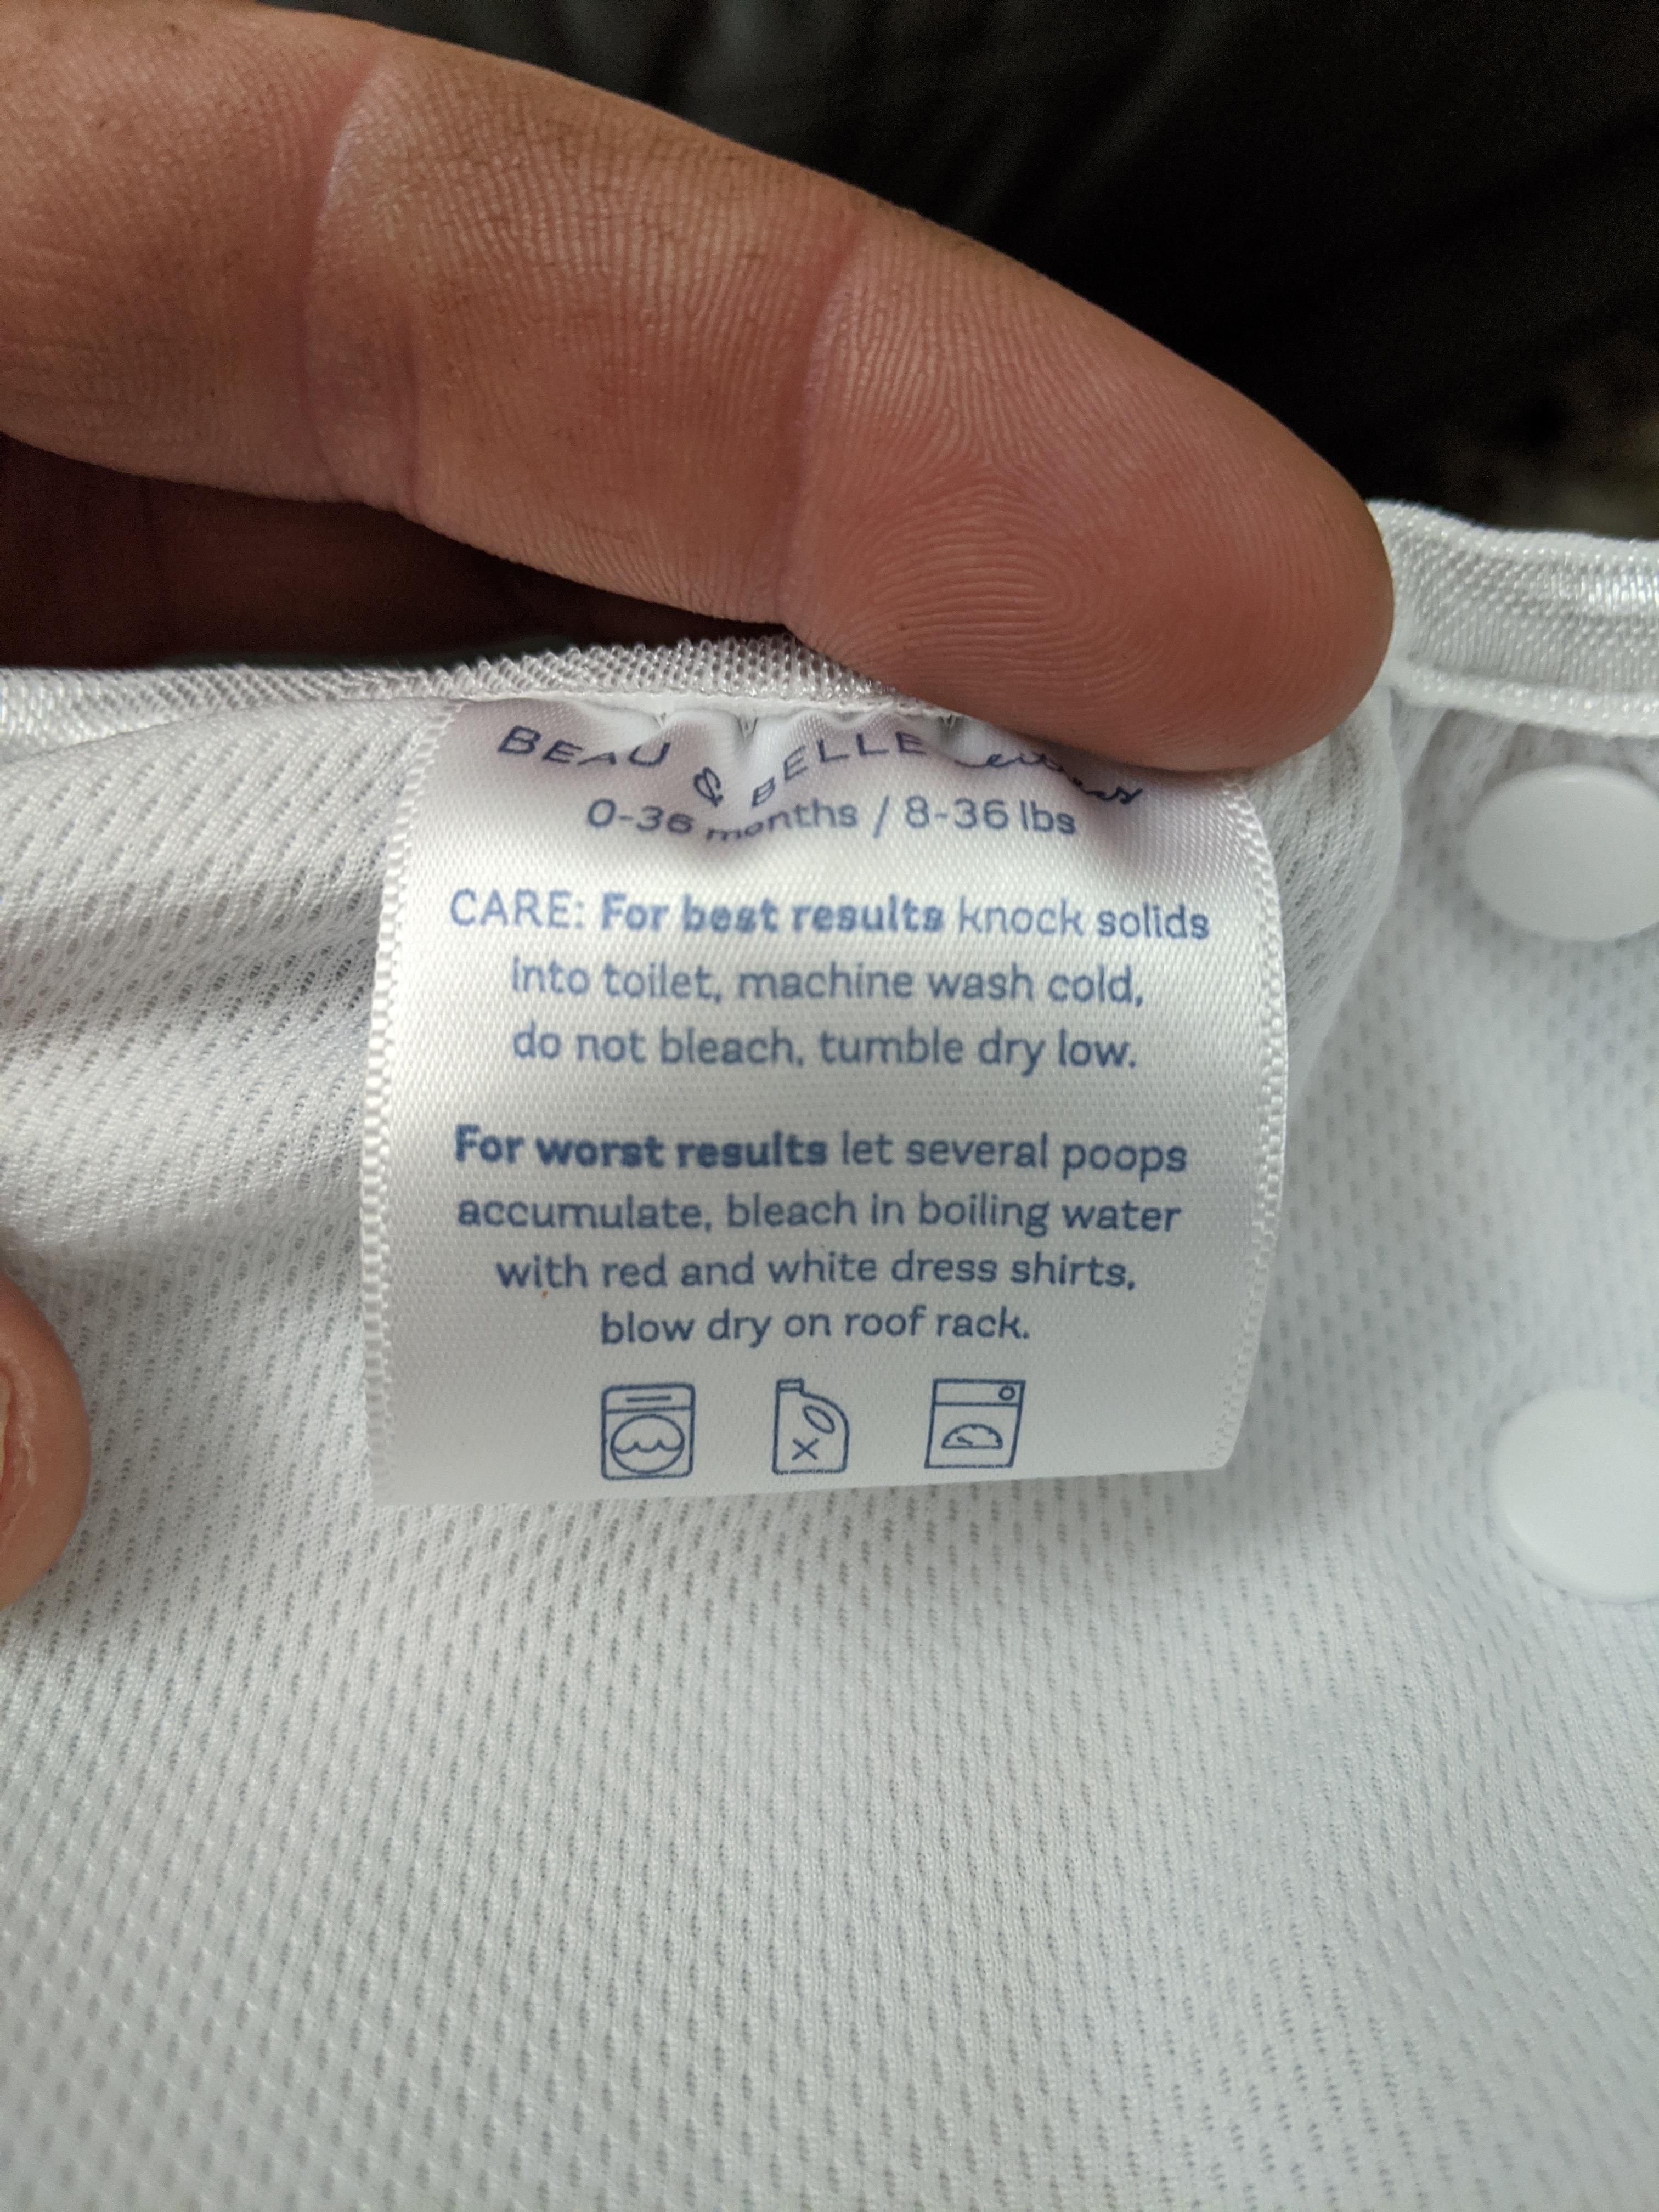 The tag on my son's swim bottoms.